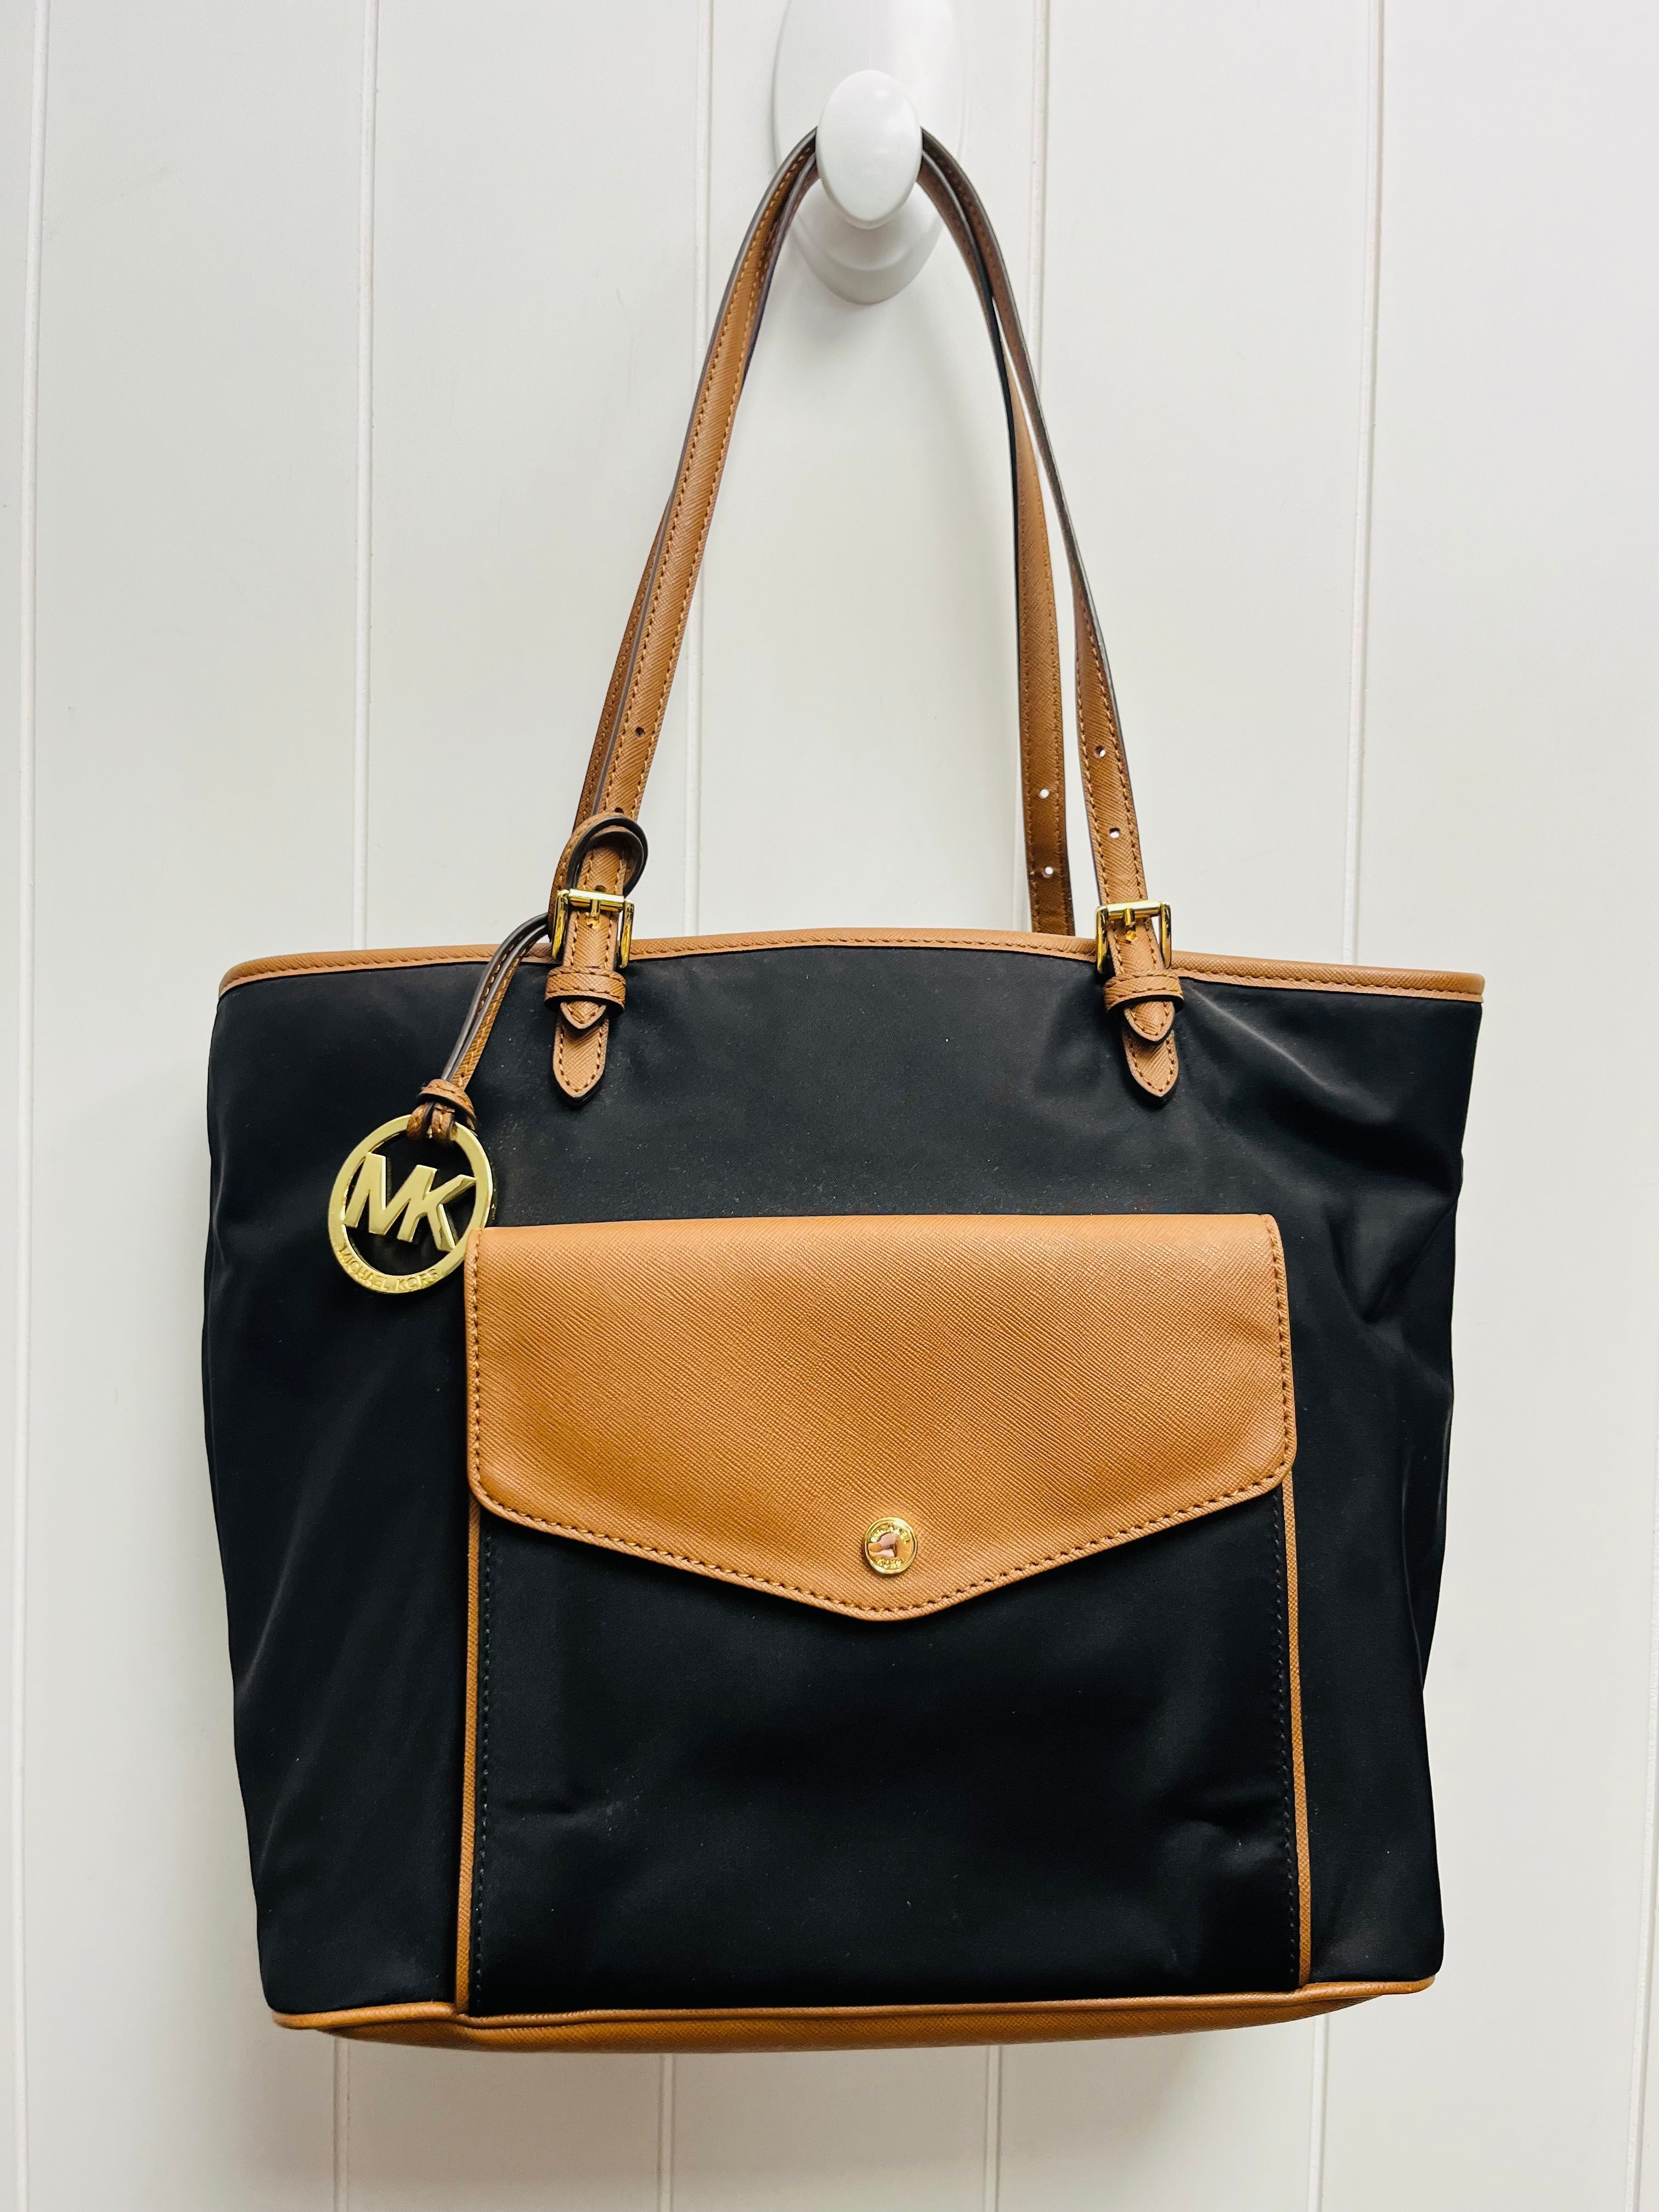 Buy Authentic Michael Kors Bags For Women In India | Tata CLiQ Luxury